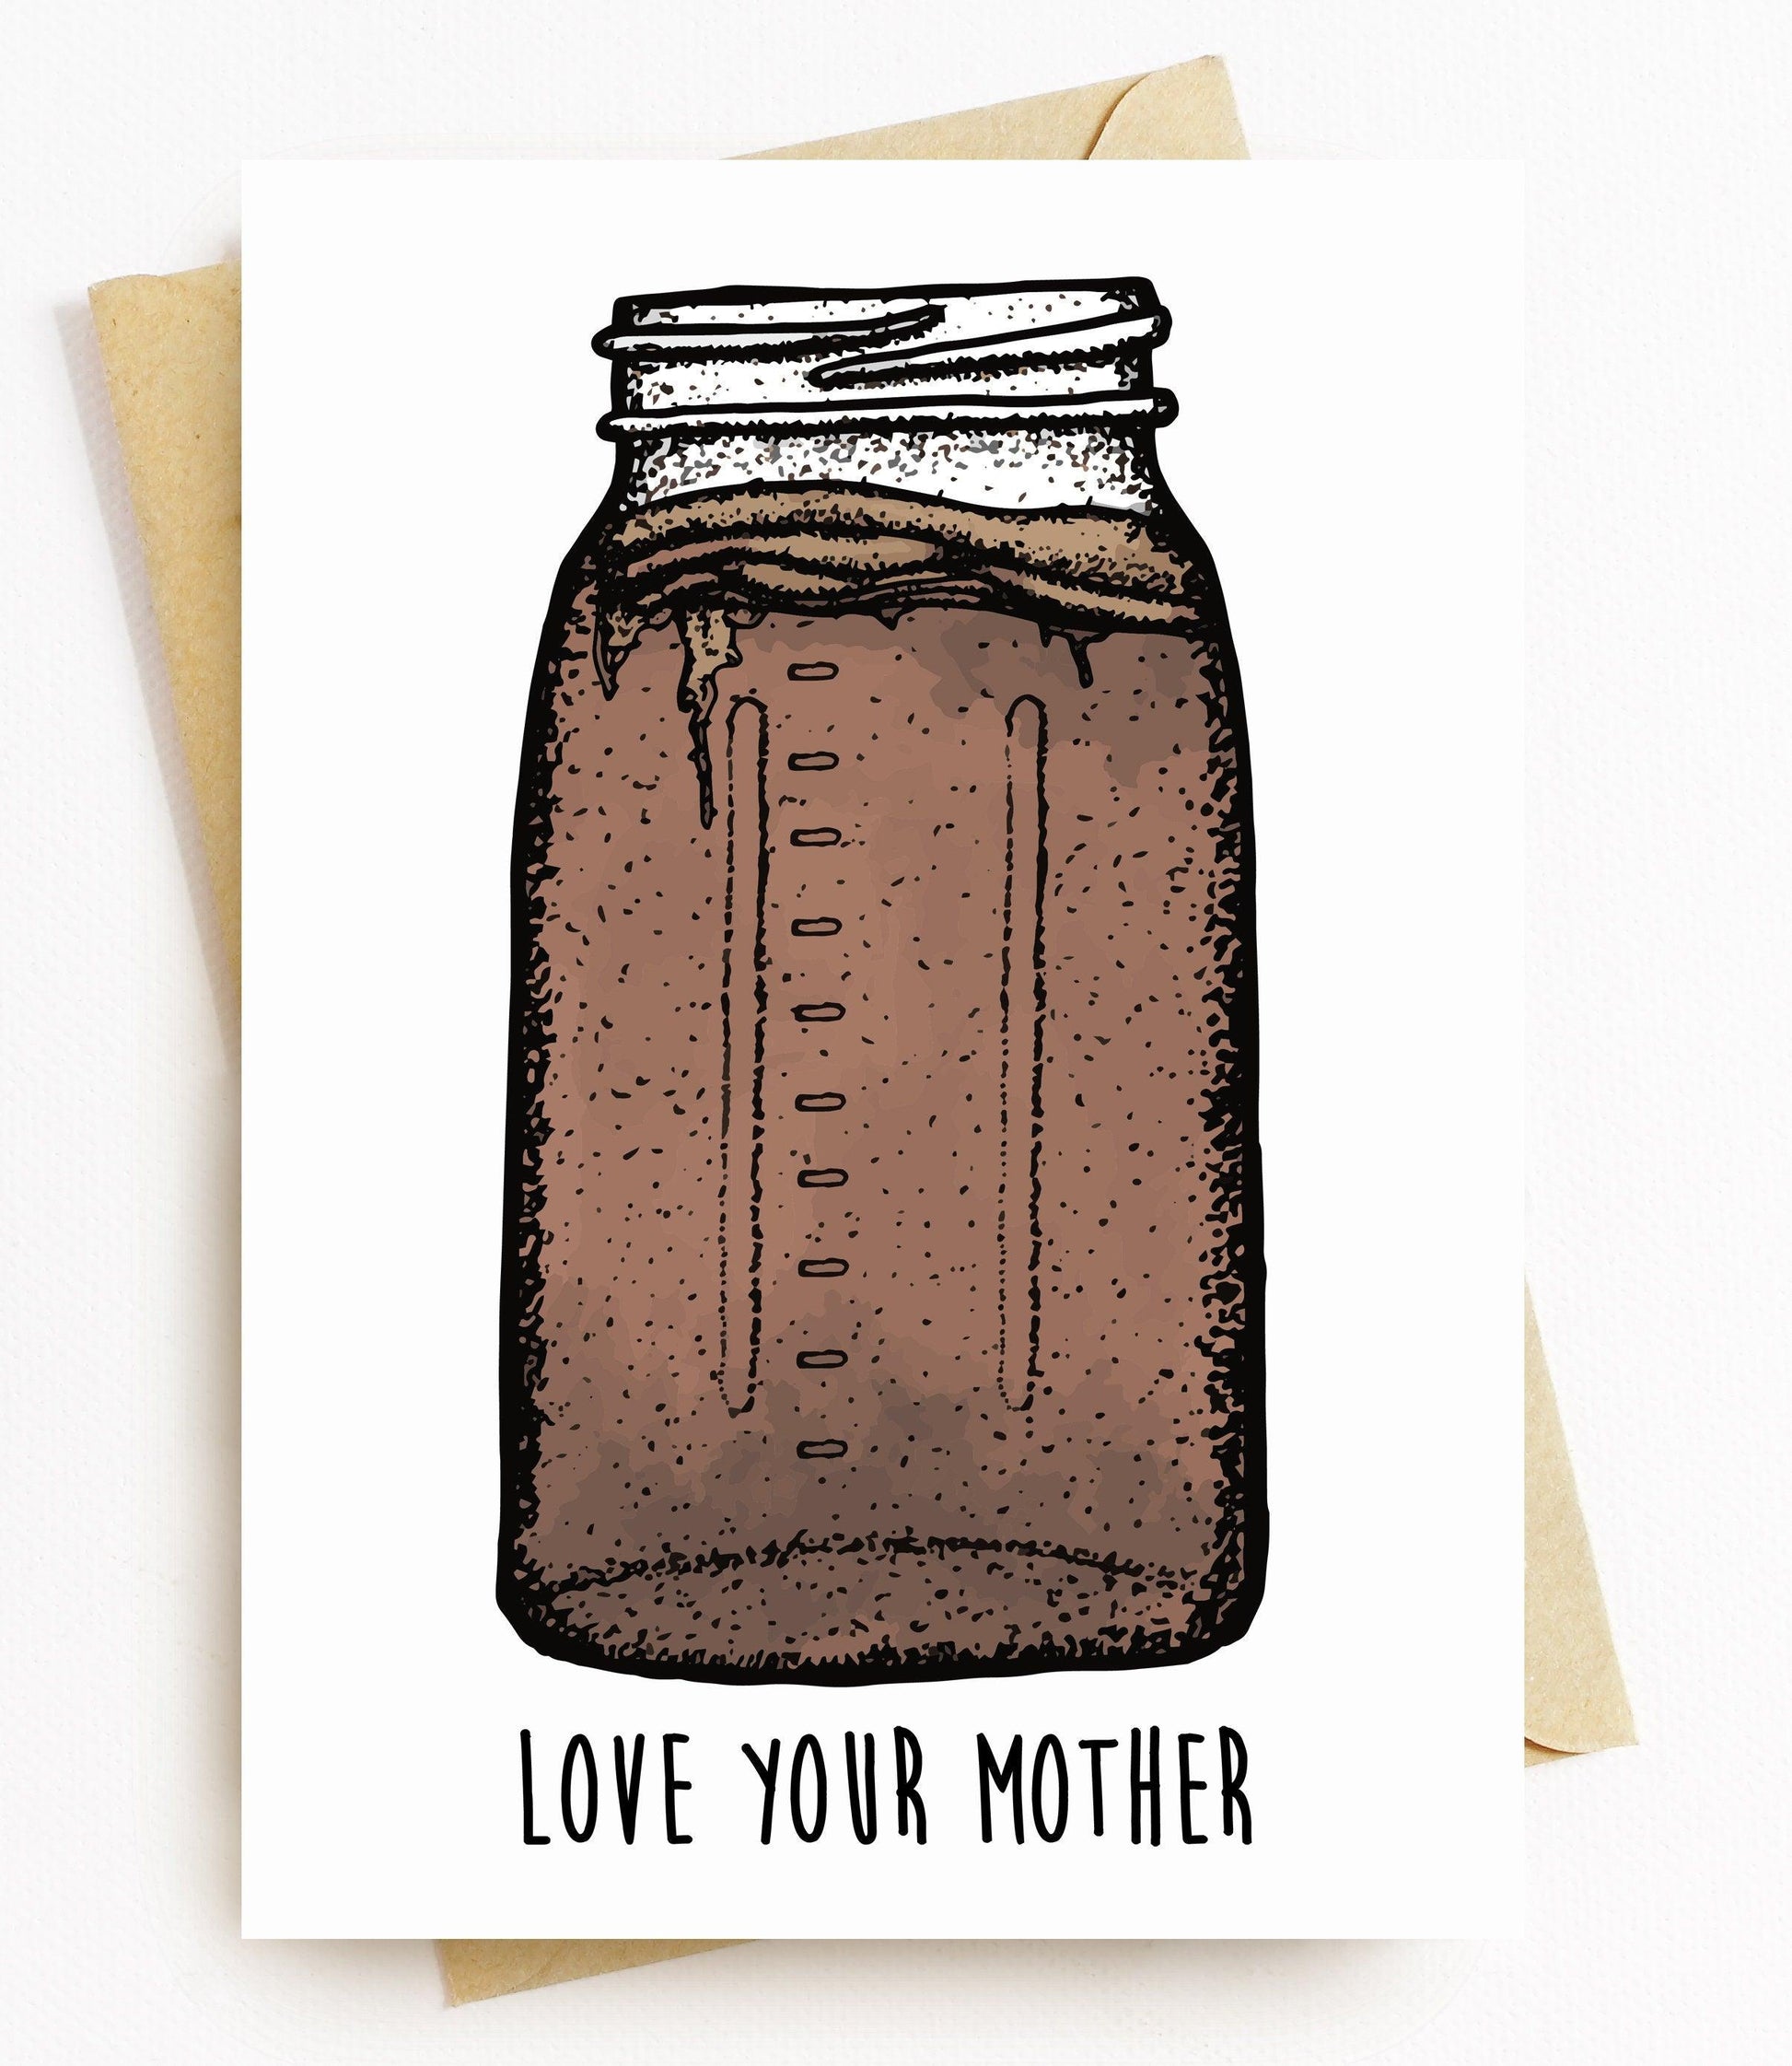 BellavanceInk: Greeting Card With Kombucha Jar With Mother Inside Love Your Mother Pen & Ink Watercolor Illustration 5 x 7 Inches - BellavanceInk